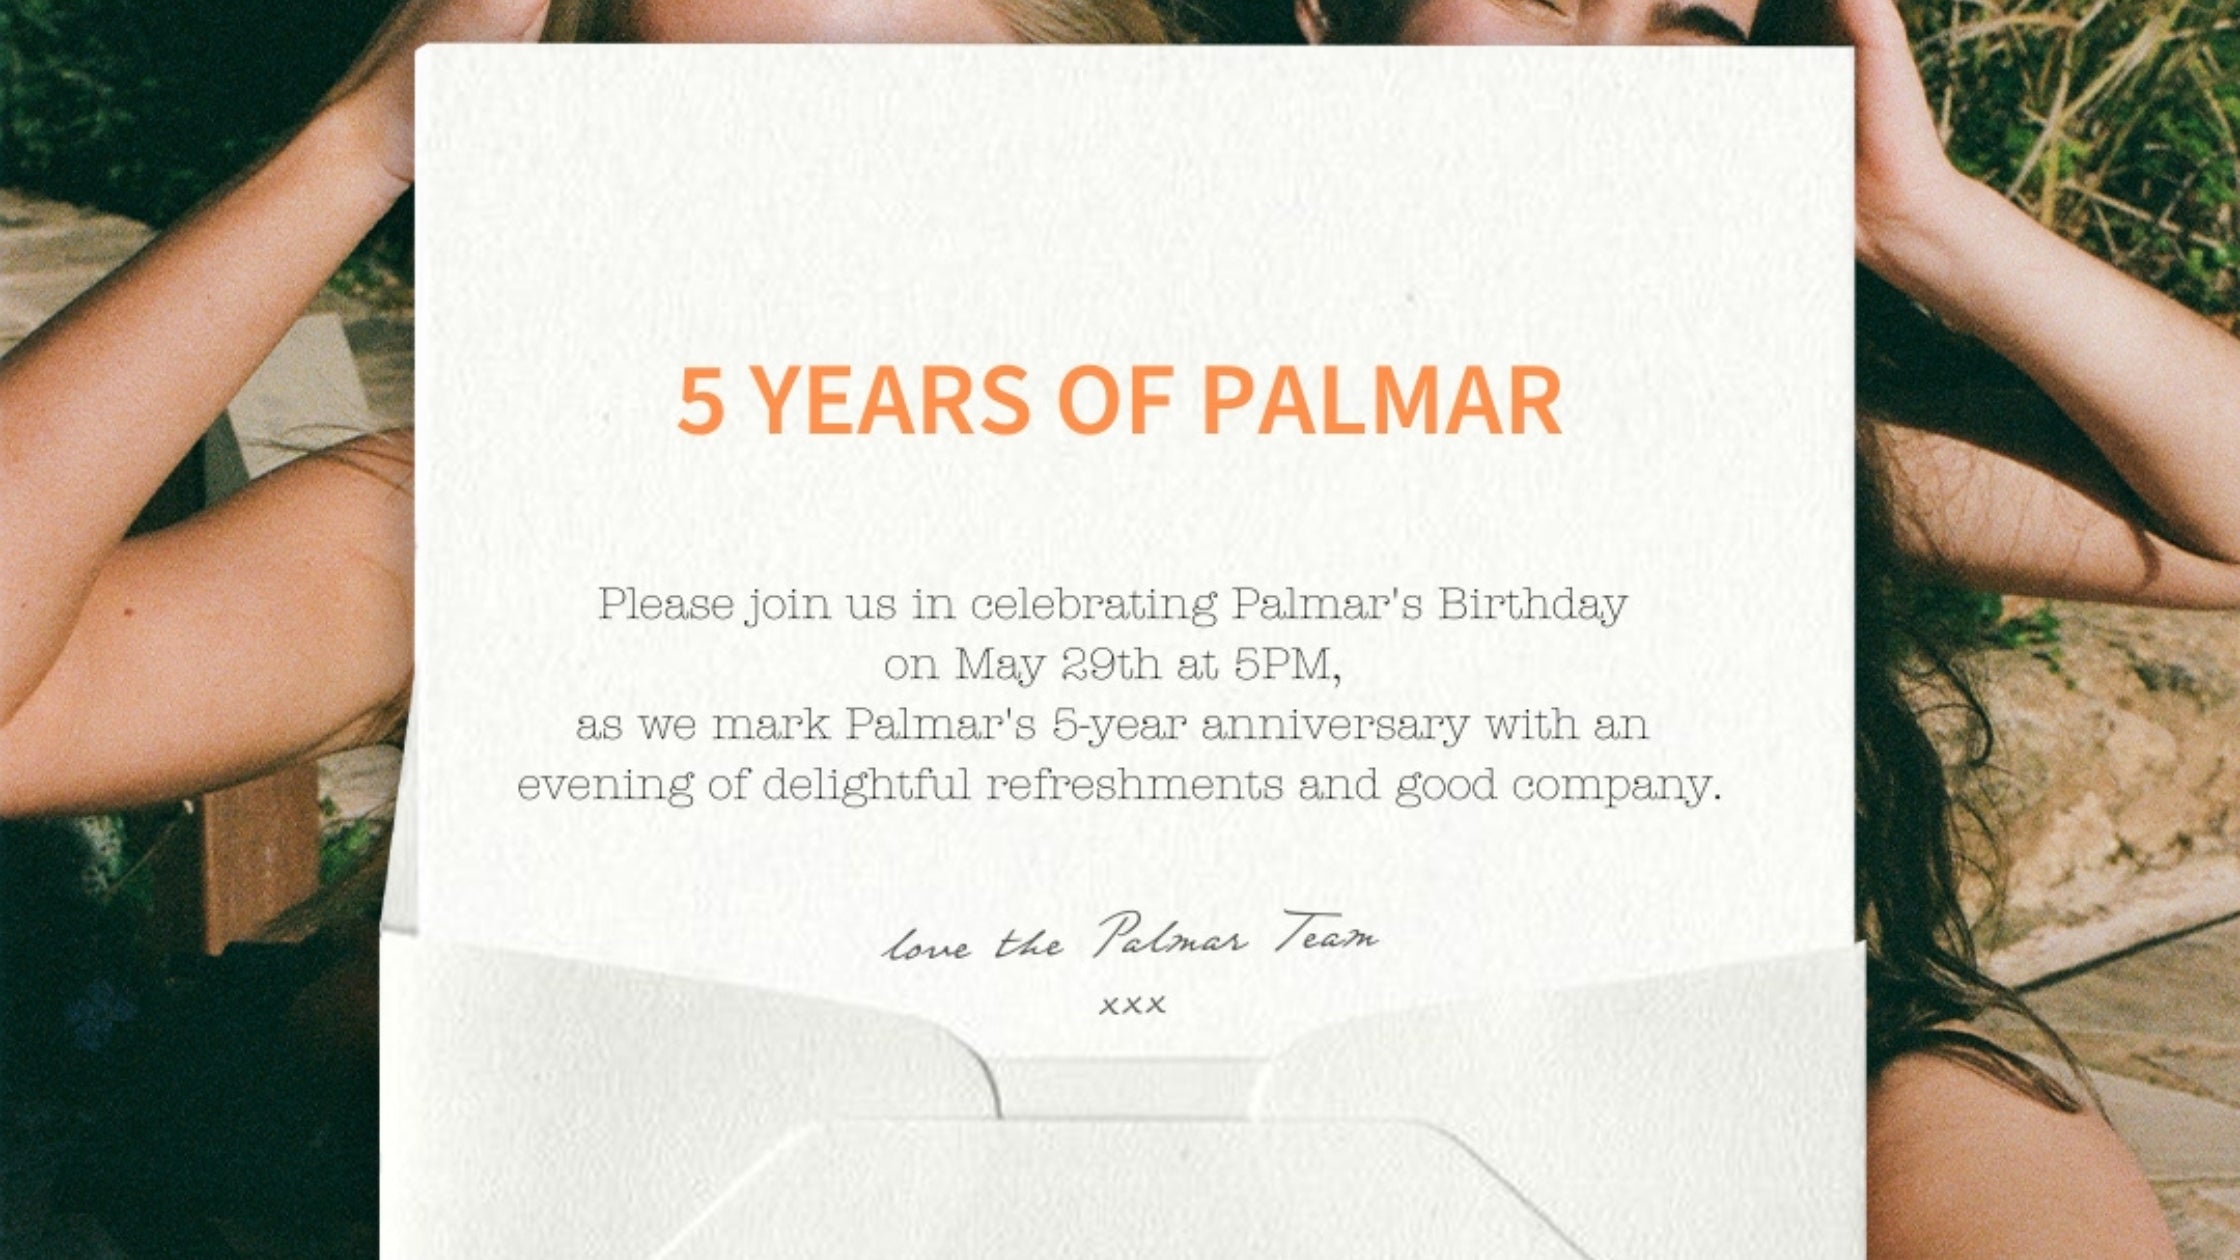 Palmar 5-Year Anniversary Event - May 29th